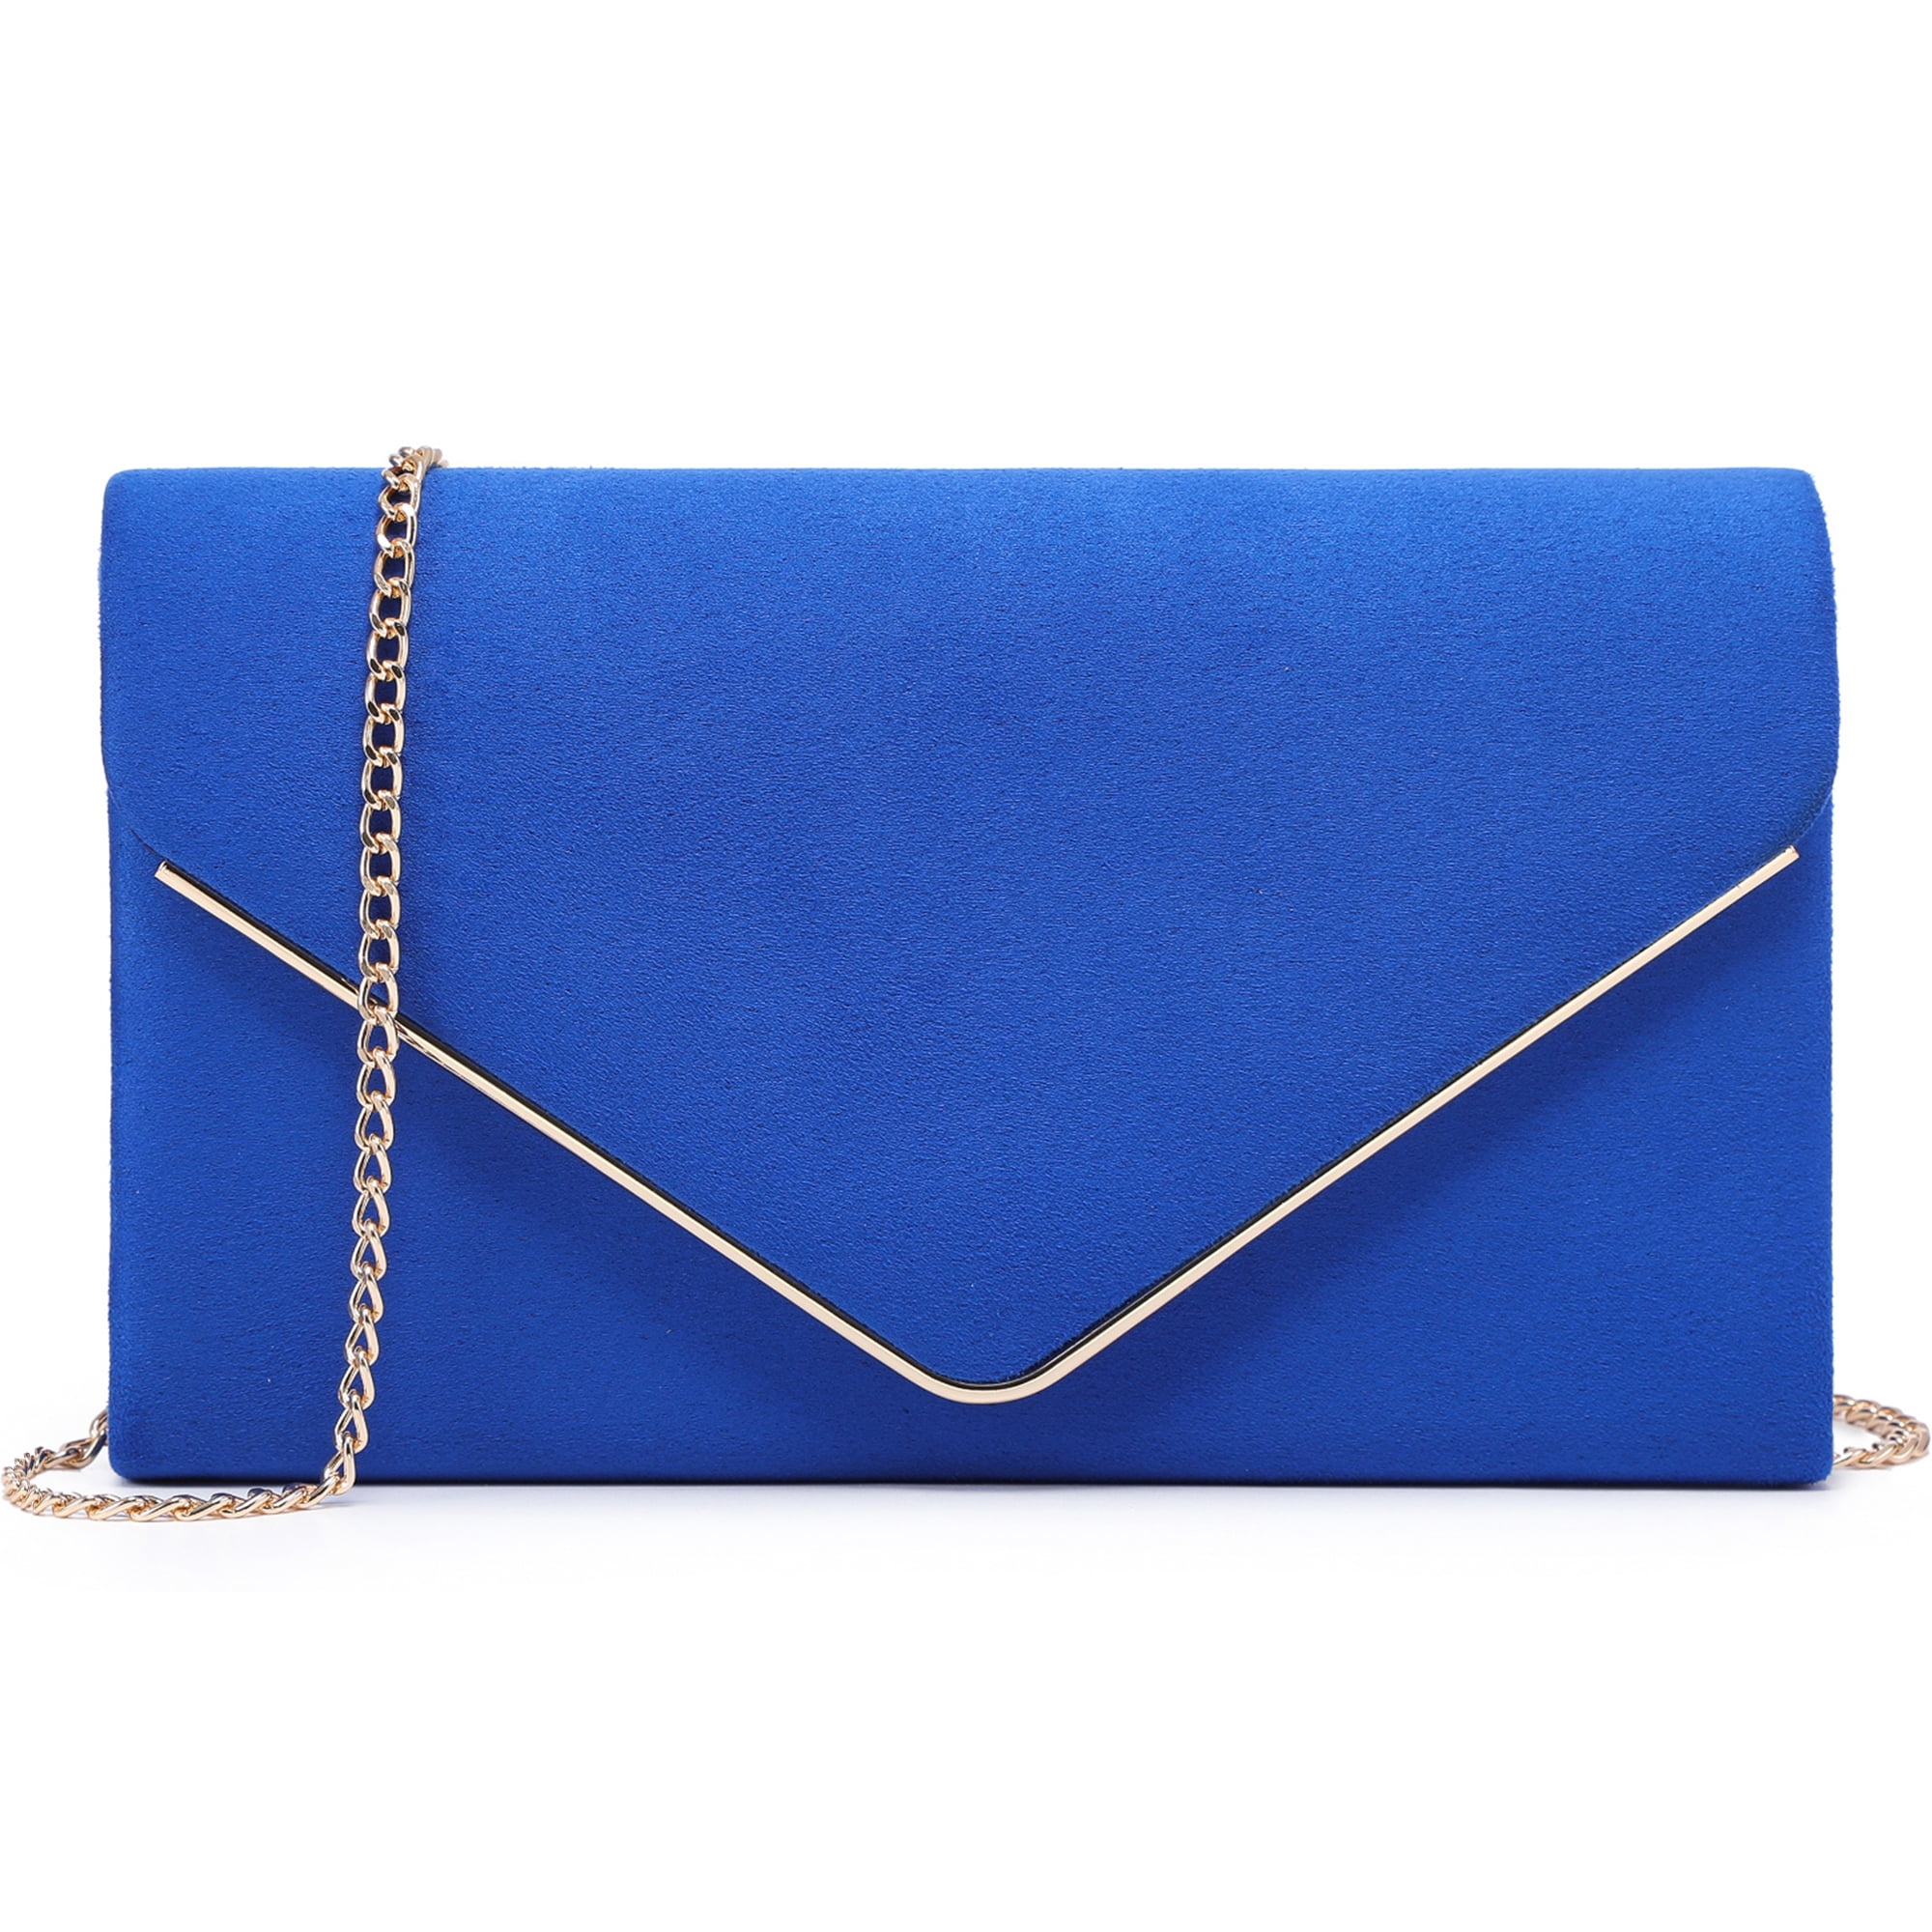 Address The Room Faux Leather Clutch in Stone